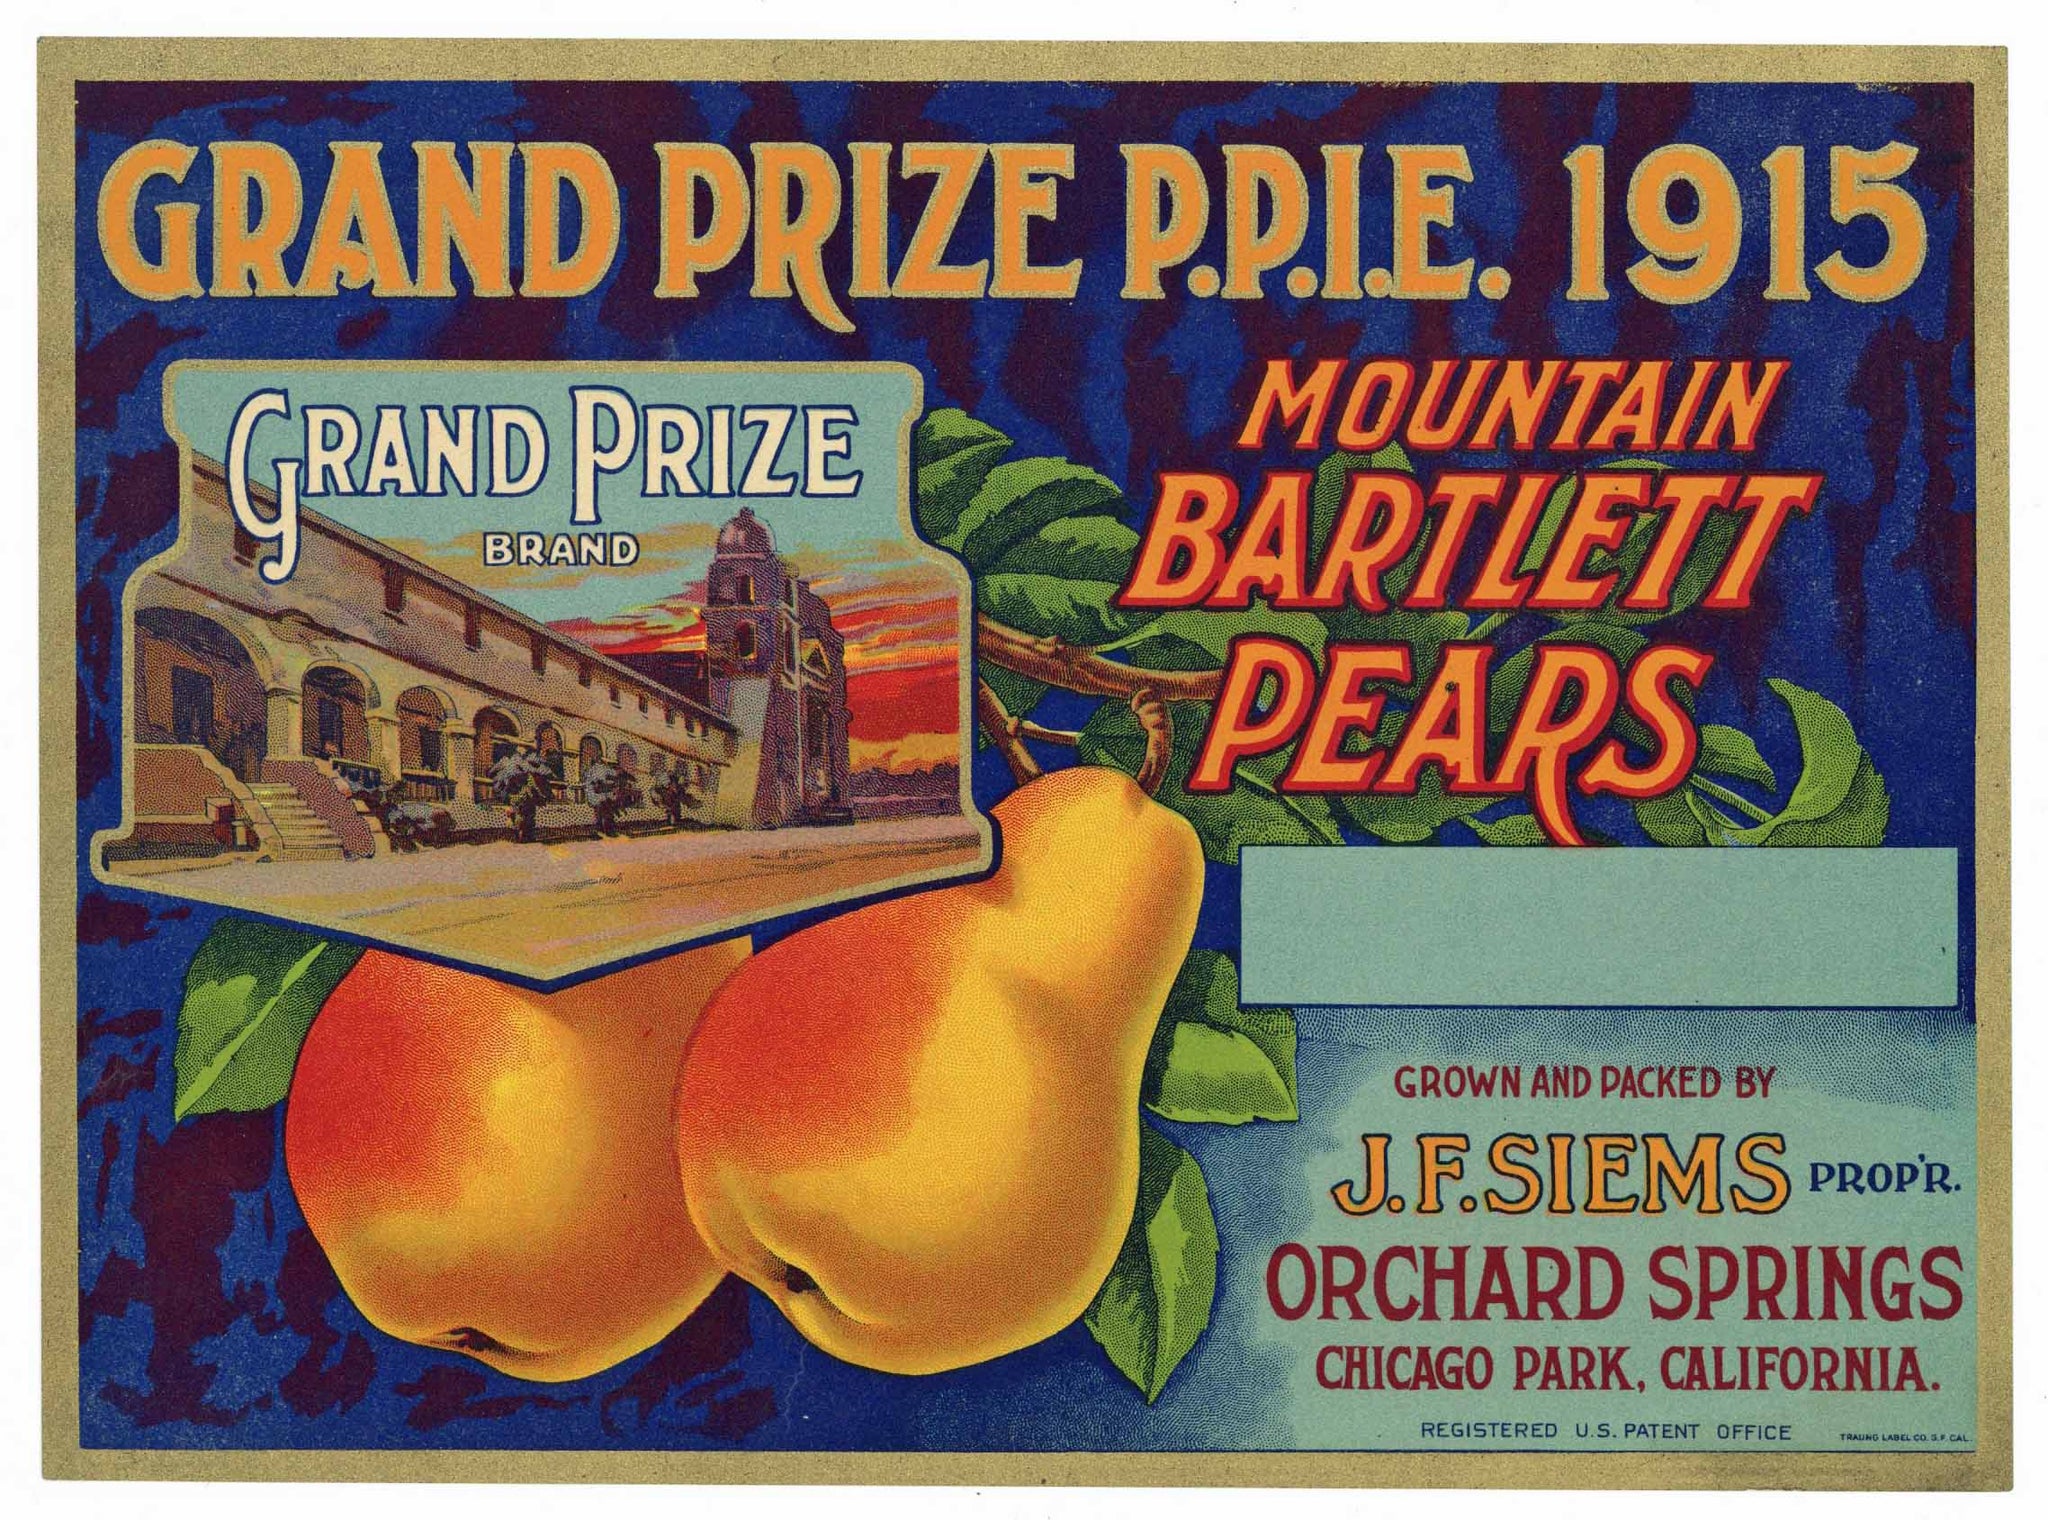 Grand Prize P.P.I.E. 1915 Brand Vintage Placer County Pear Crate Label